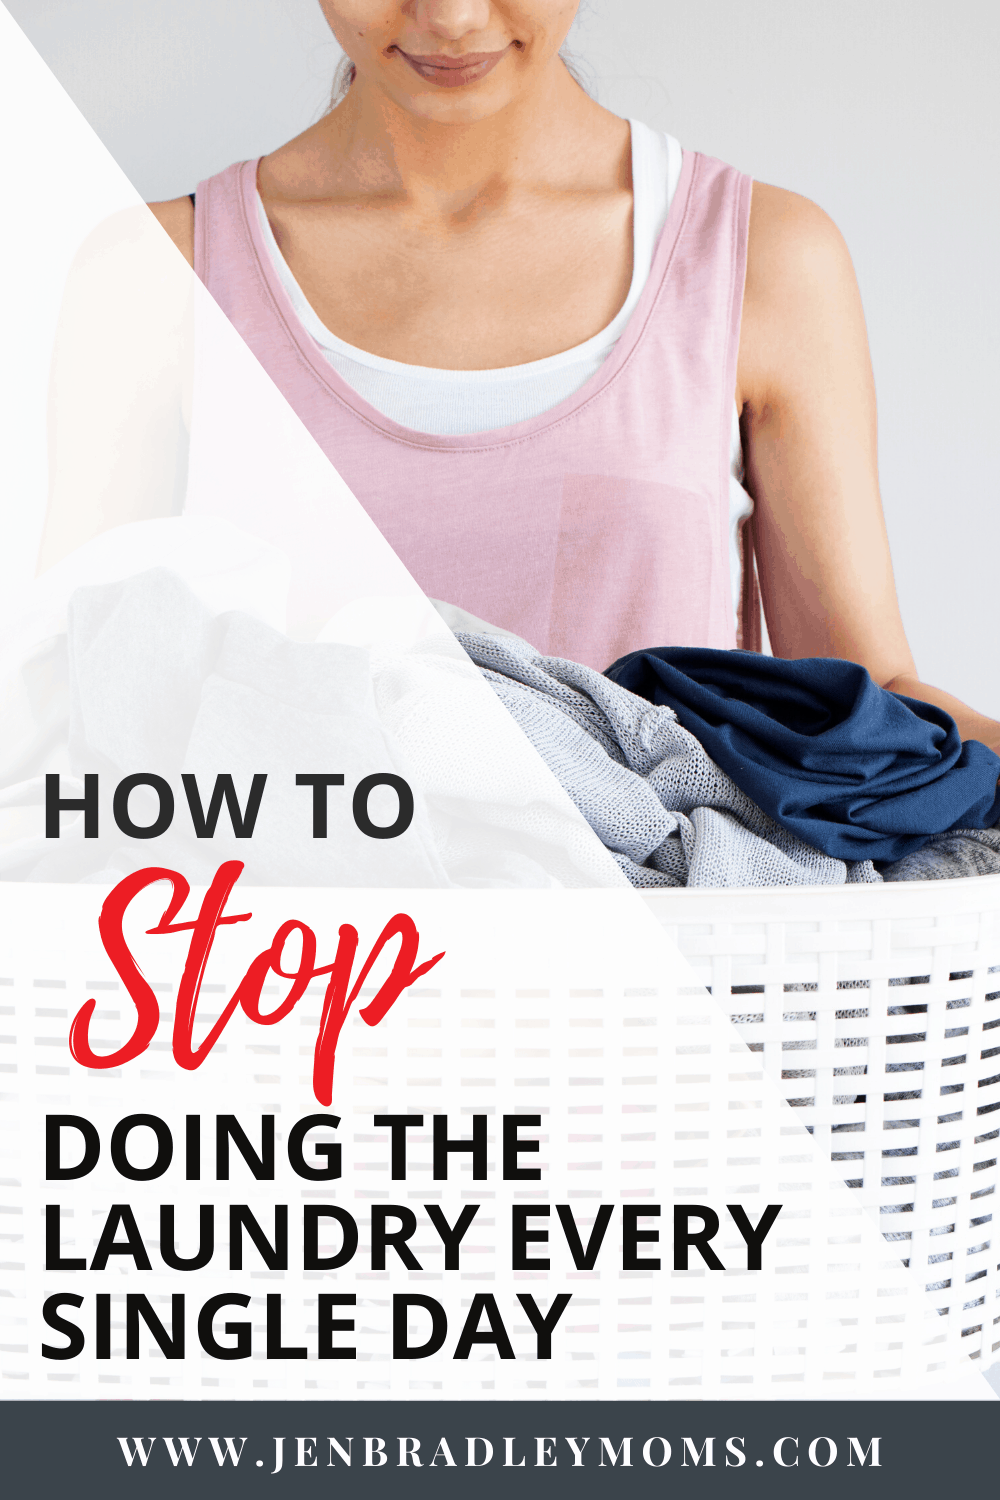 How to Stop Doing the Laundry Every Single Day